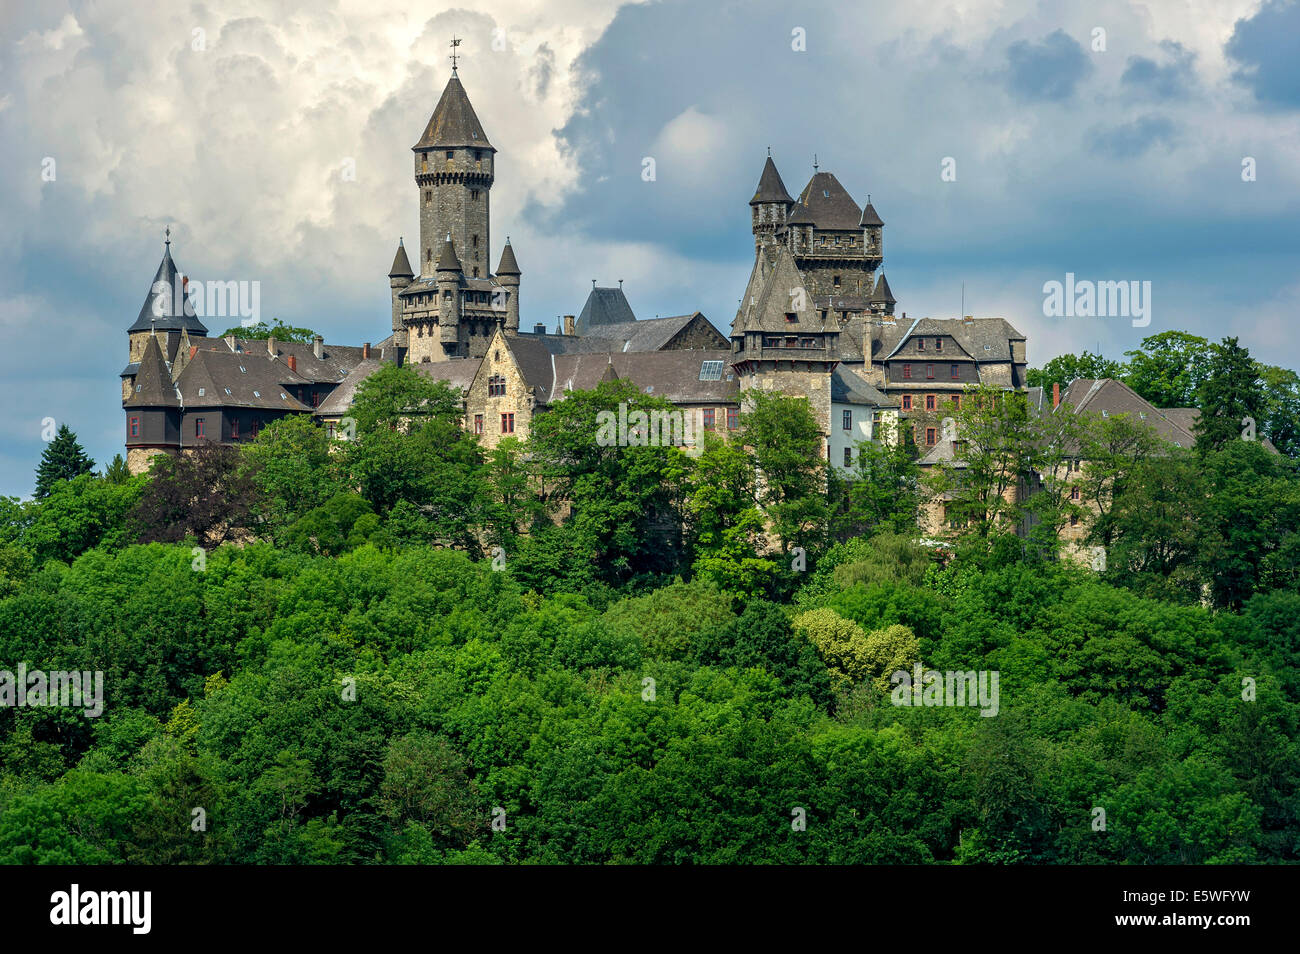 Castle towers, Hubertus Tower, New Castle Keep, Georg Tower and Alter Stock tower, in the overall view of Castle Braunfels Stock Photo